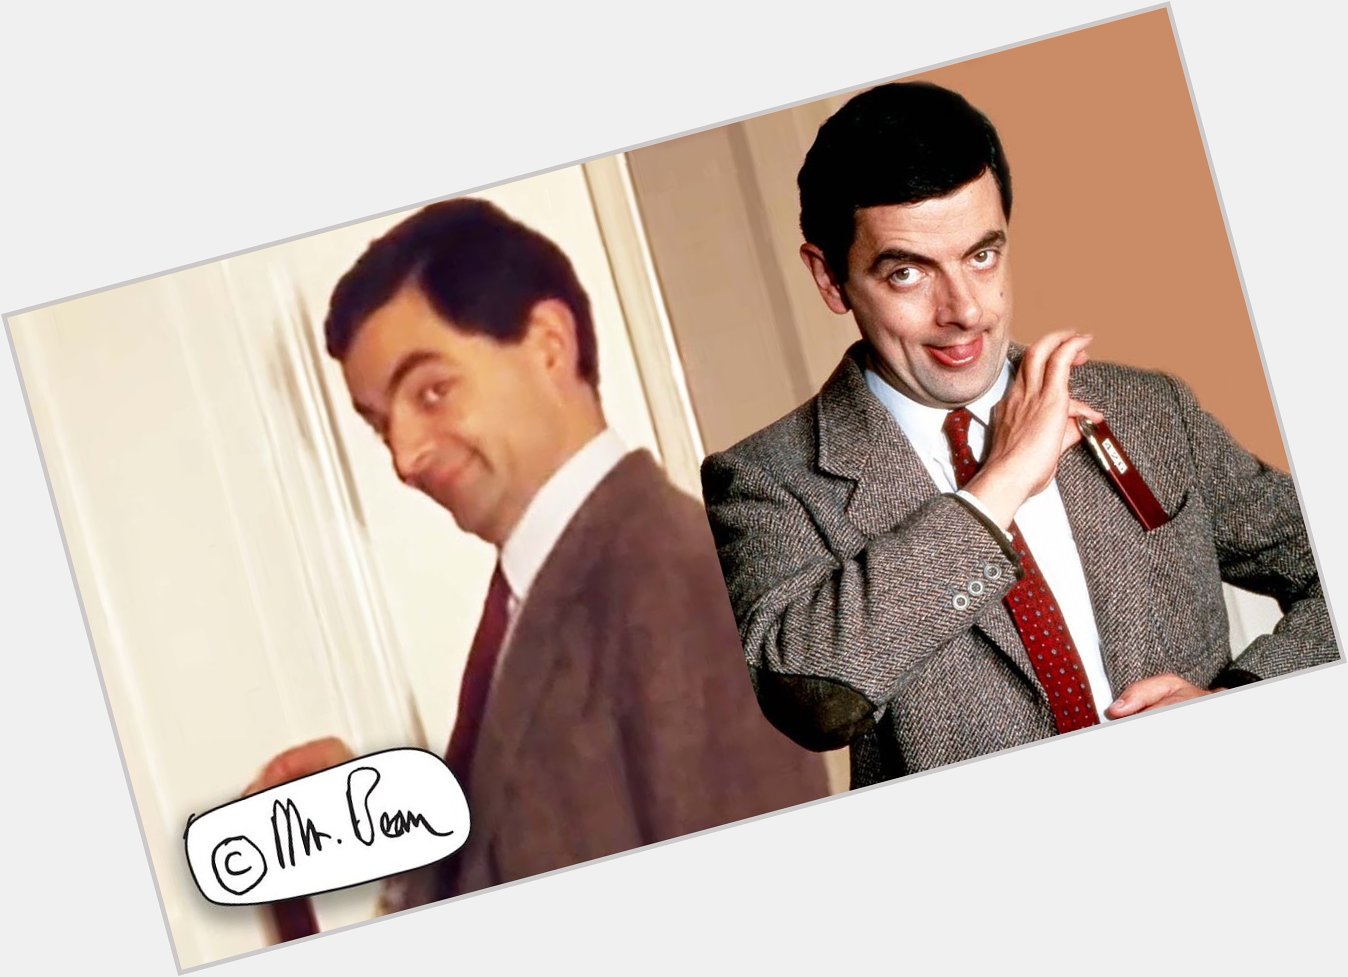 Happy Birthday to Mr. Bean (Rowan Atkinson), One of the favourite comedy Actors of 90\s kids 